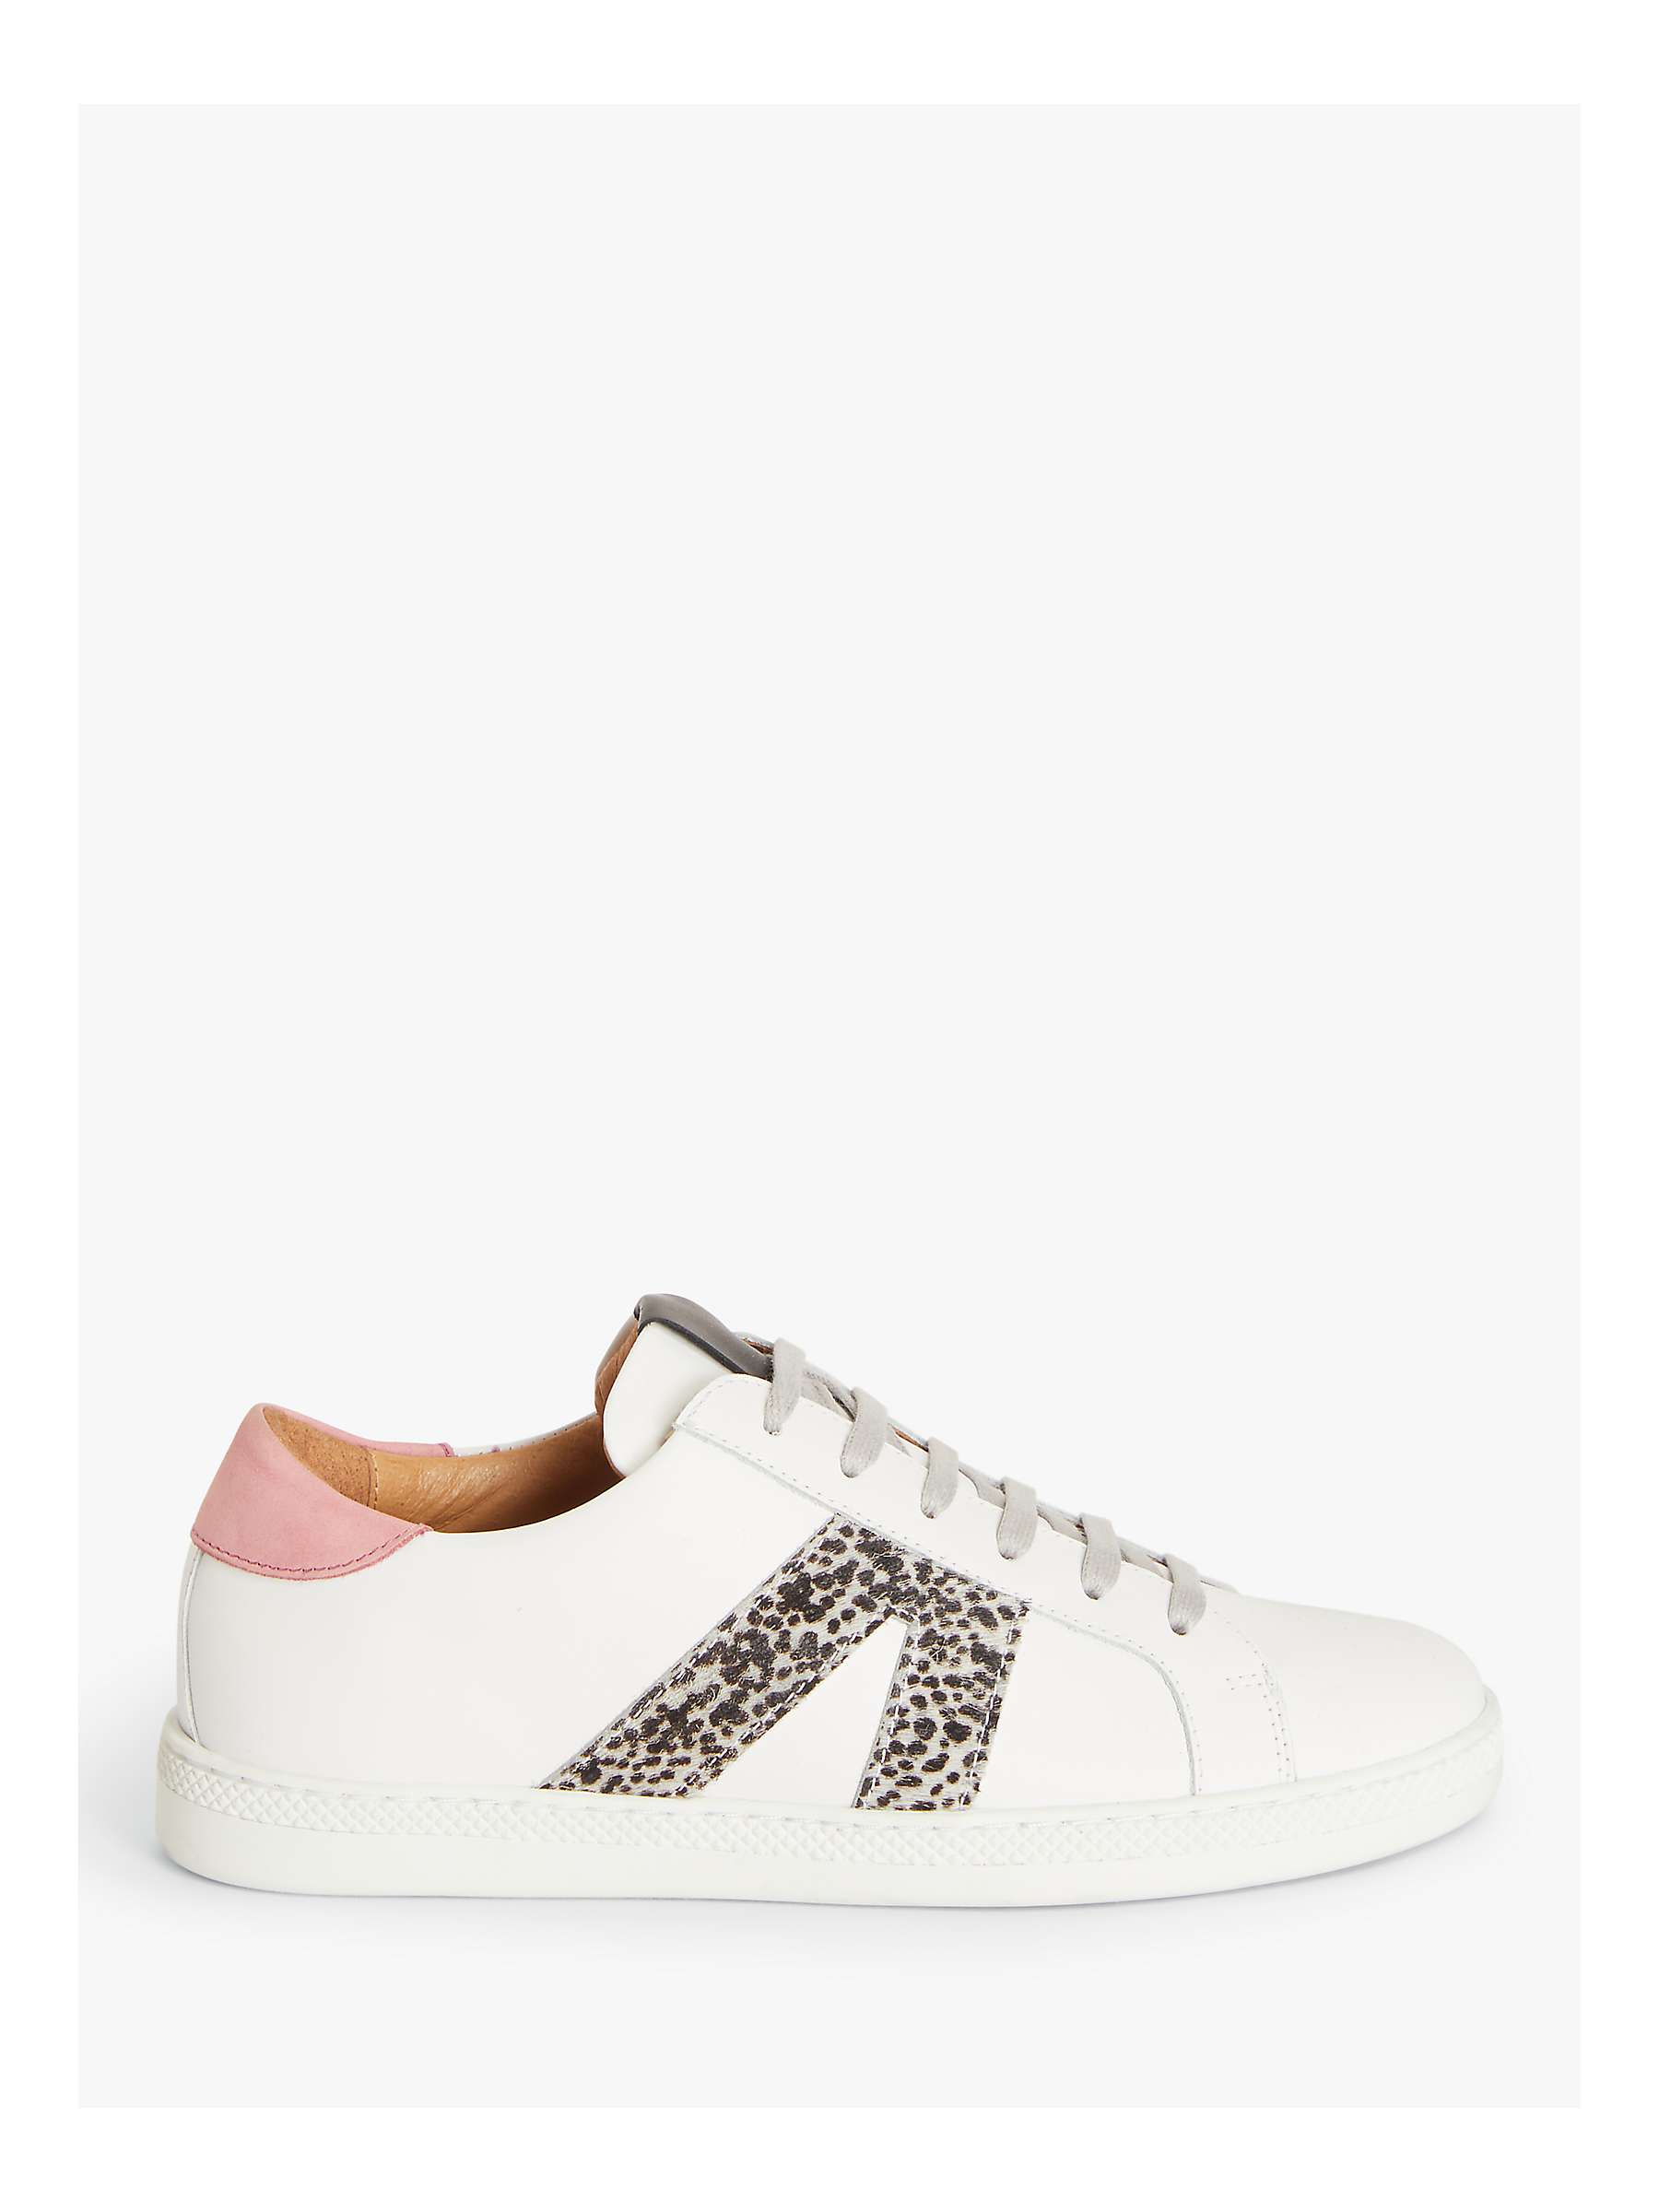 Buy AND/OR Elenor Leather Colour Block Trainers Online at johnlewis.com